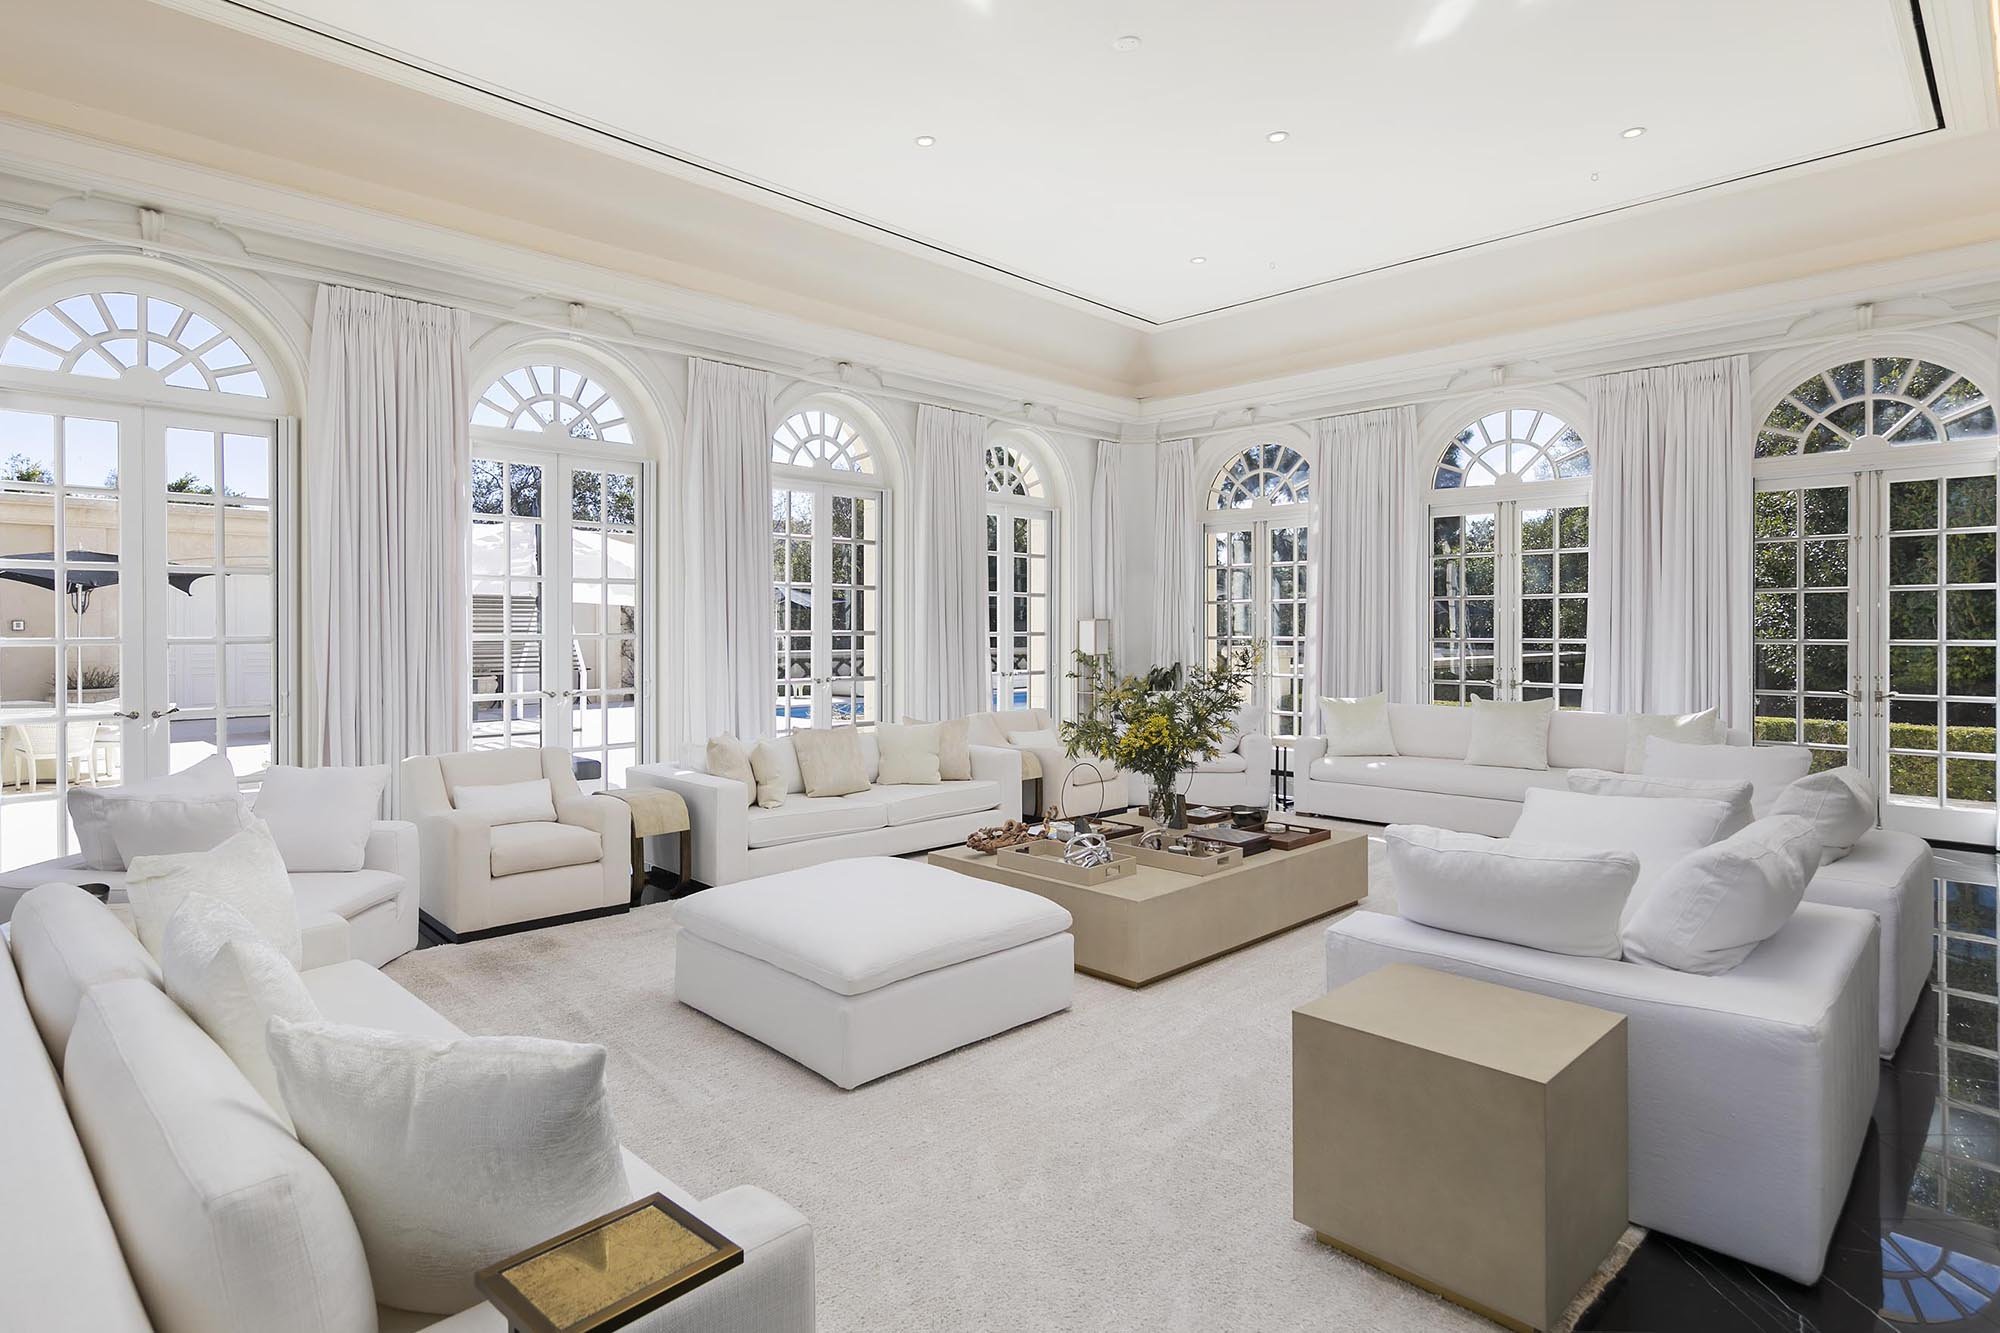 Francis York The 'Spelling Manor' is Back on the Market for $165M 15.jpg